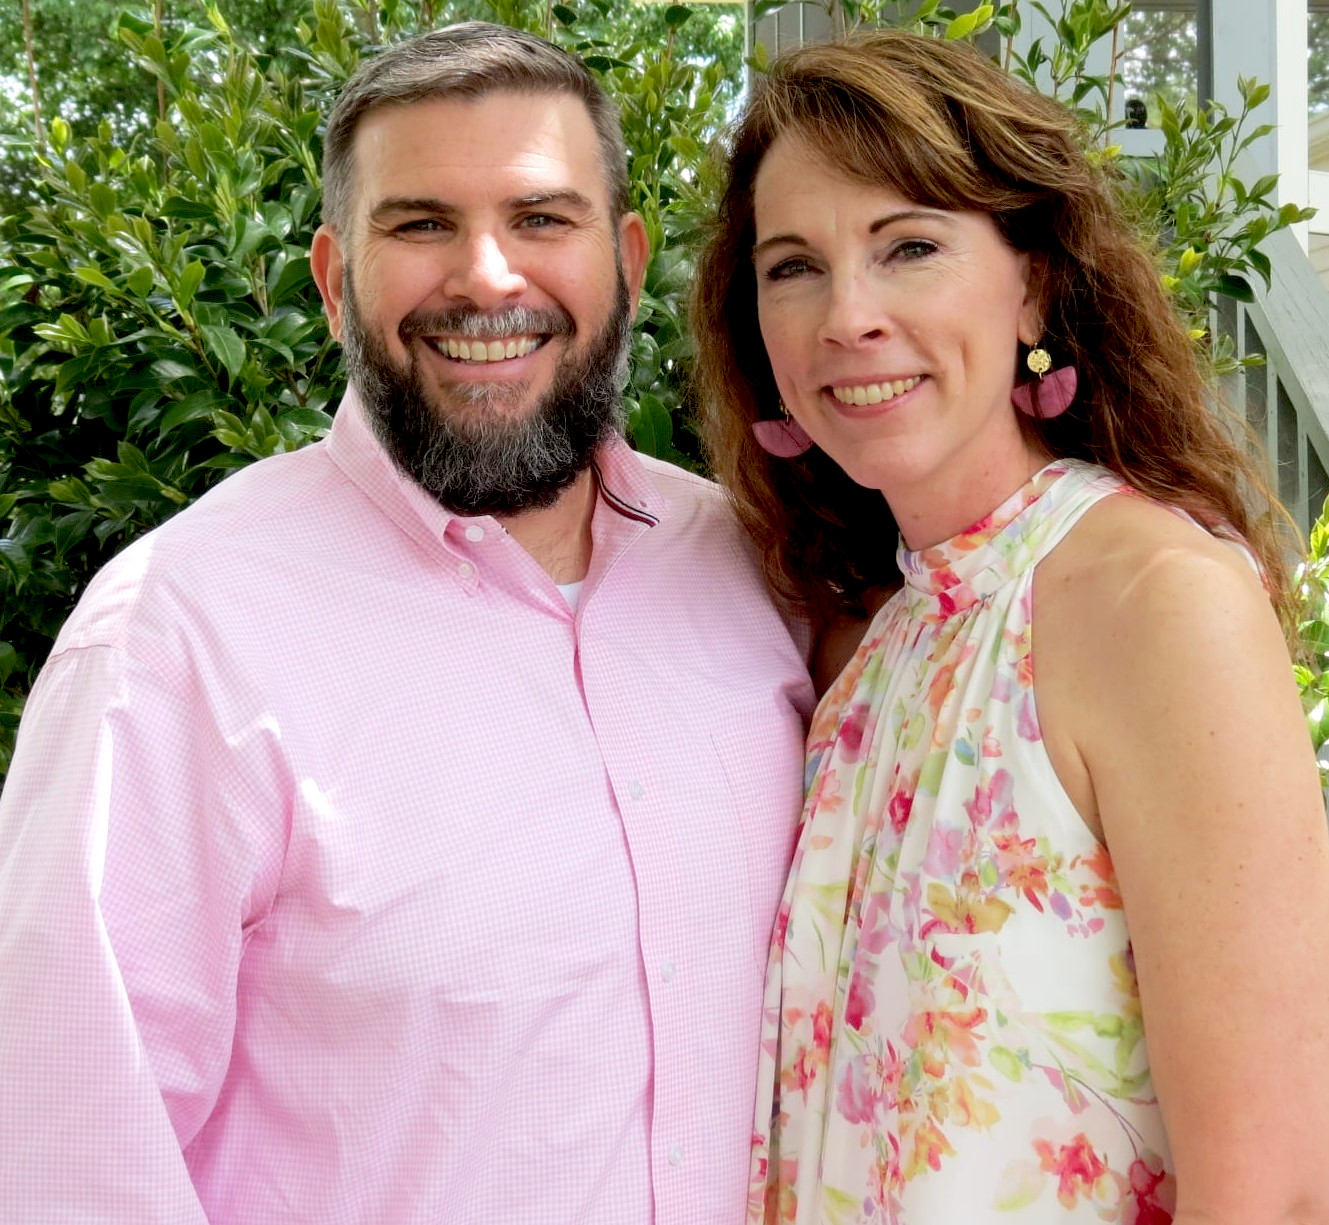 Man and woman standing together in pink against green background